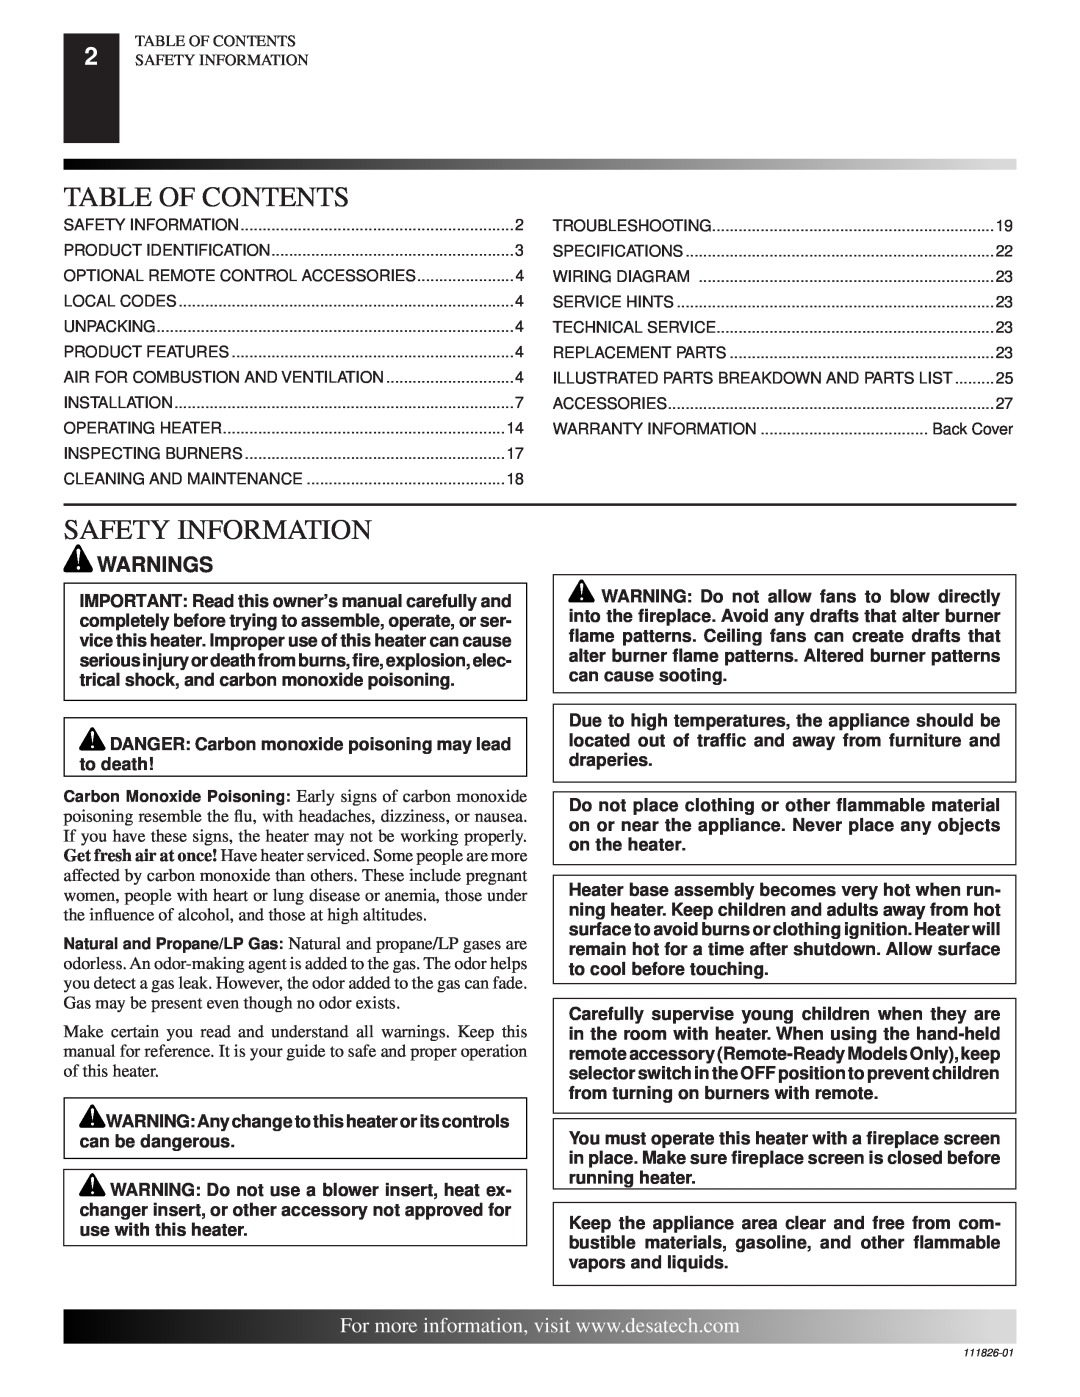 Desa VF-18N-PDG, VF-24P-PDG, VF-24N-PDG, VF-18P-BTB, VF-18N-BTB, VF-24P-BTB Table Of Contents, Safety Information, Warnings 